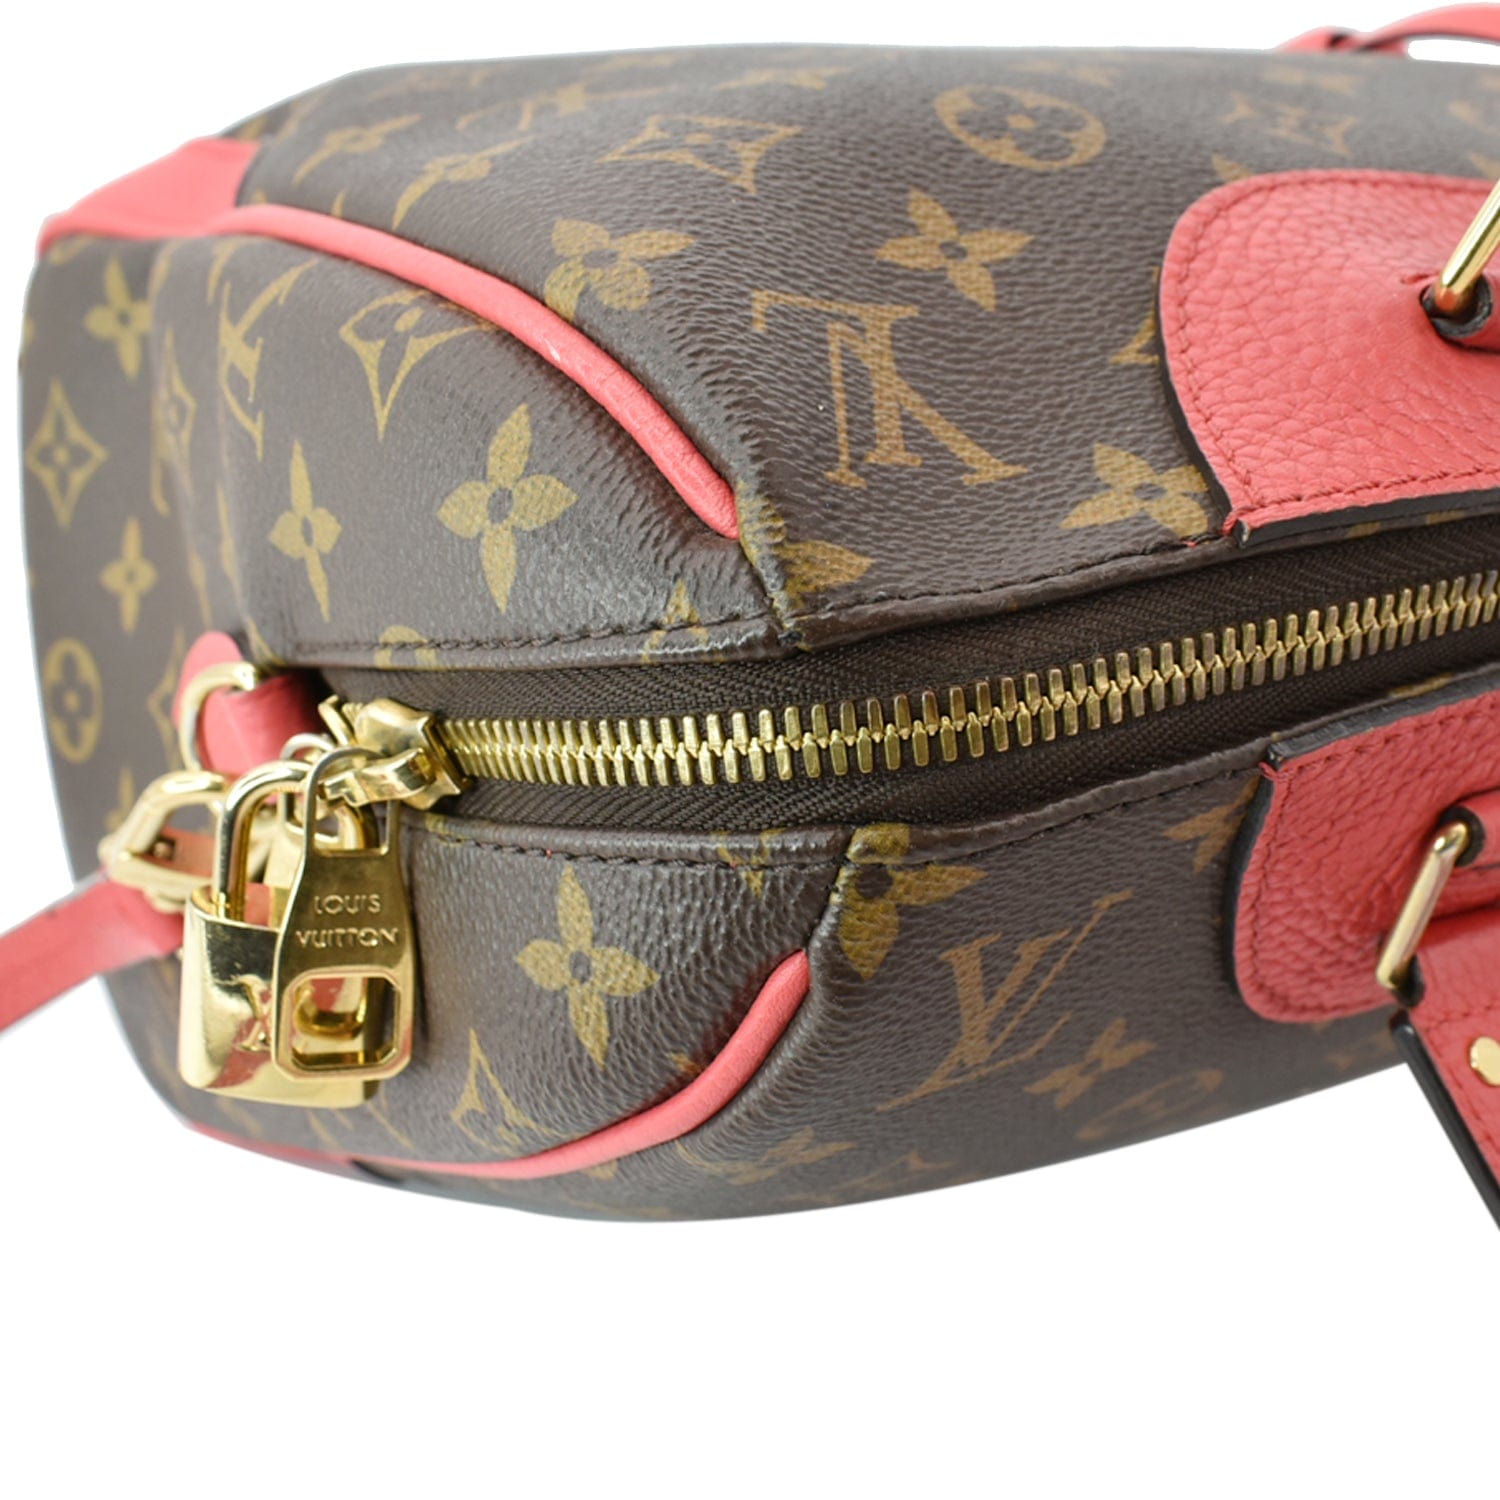 Louis Vuitton Monogram Canvas Retiro Bag Reference Guide - Spotted